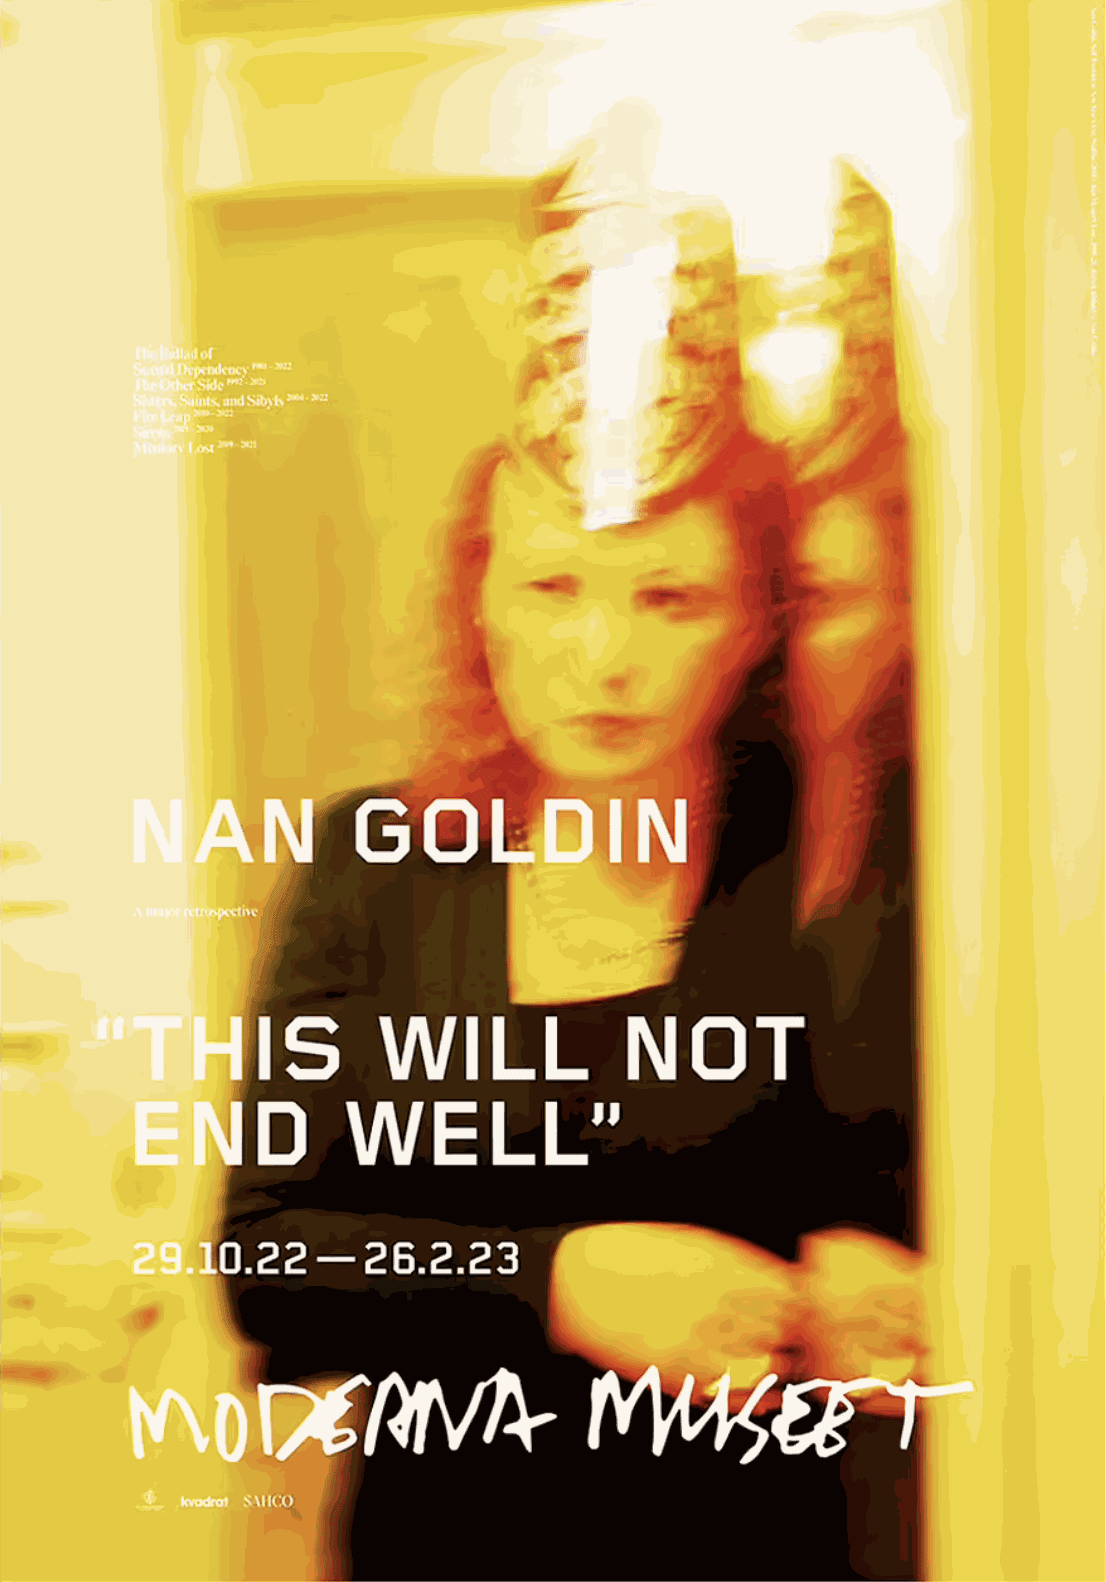 Nan Goldin - Works | The 3nd Gallery